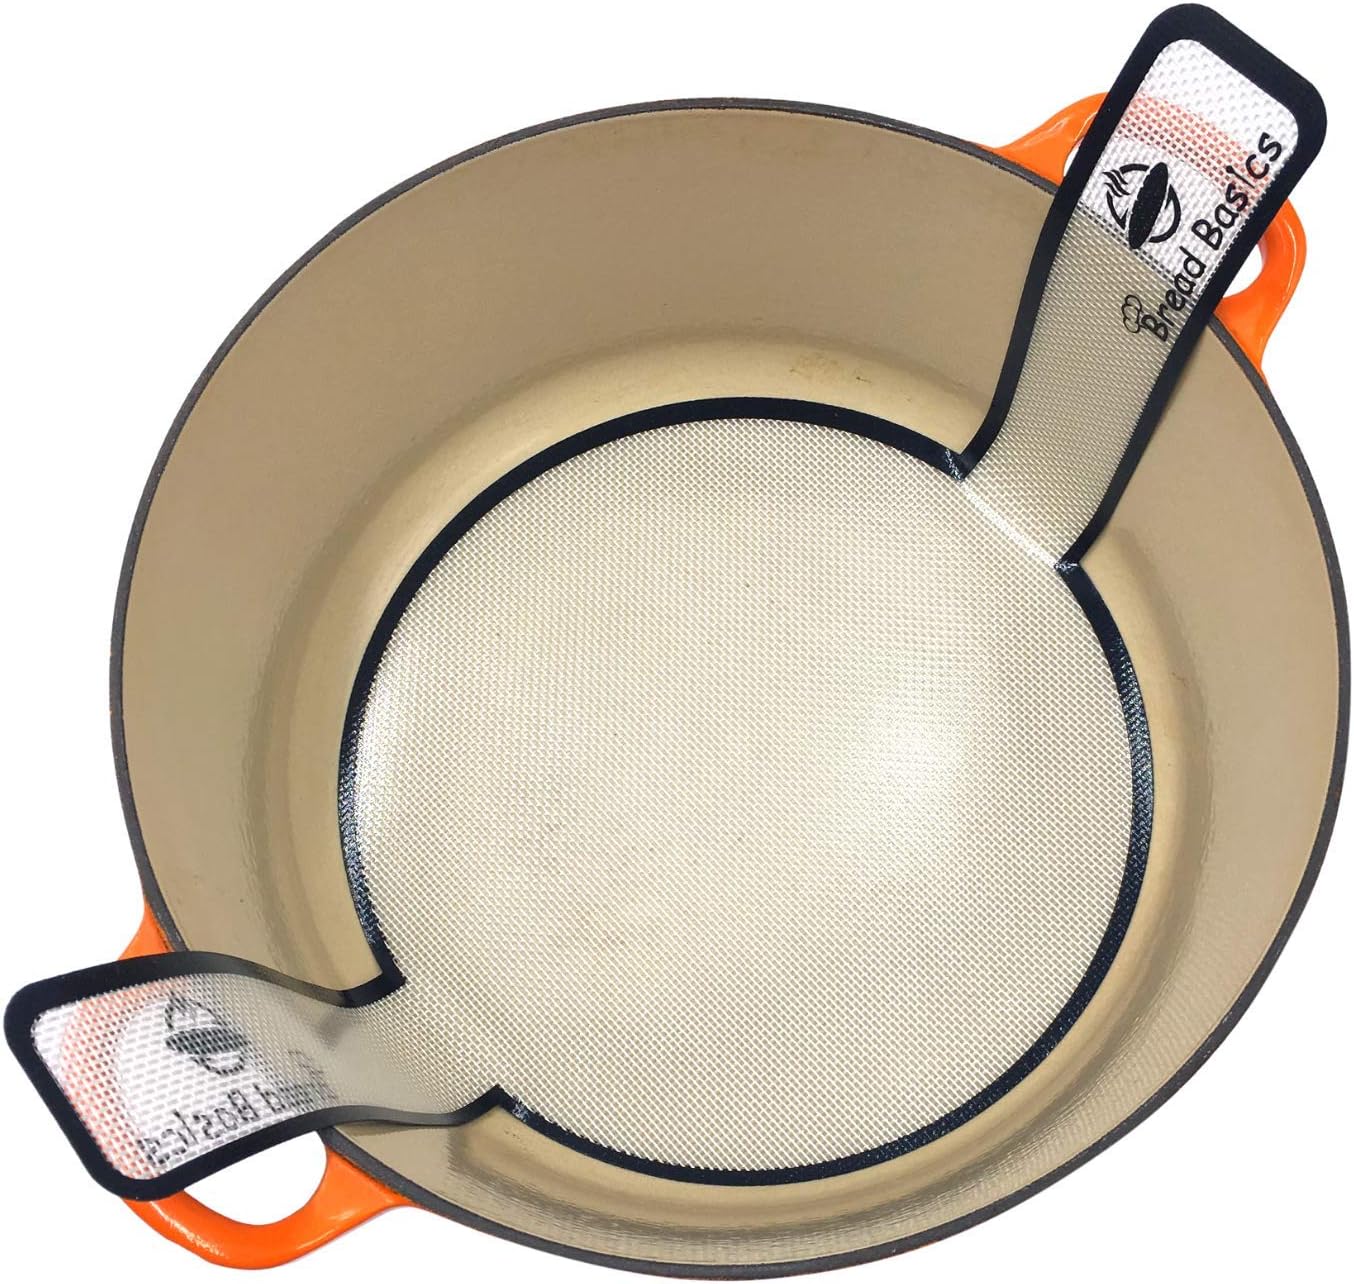 Bread Basics Silicone Baking Mat for Dutch Oven Bread Baking w/Storage Band - Long Handles for Gentler  Safer Transfer of Dough - Easy to Clean - Eco-Friendly Alternative for Parchment Paper - 8.3